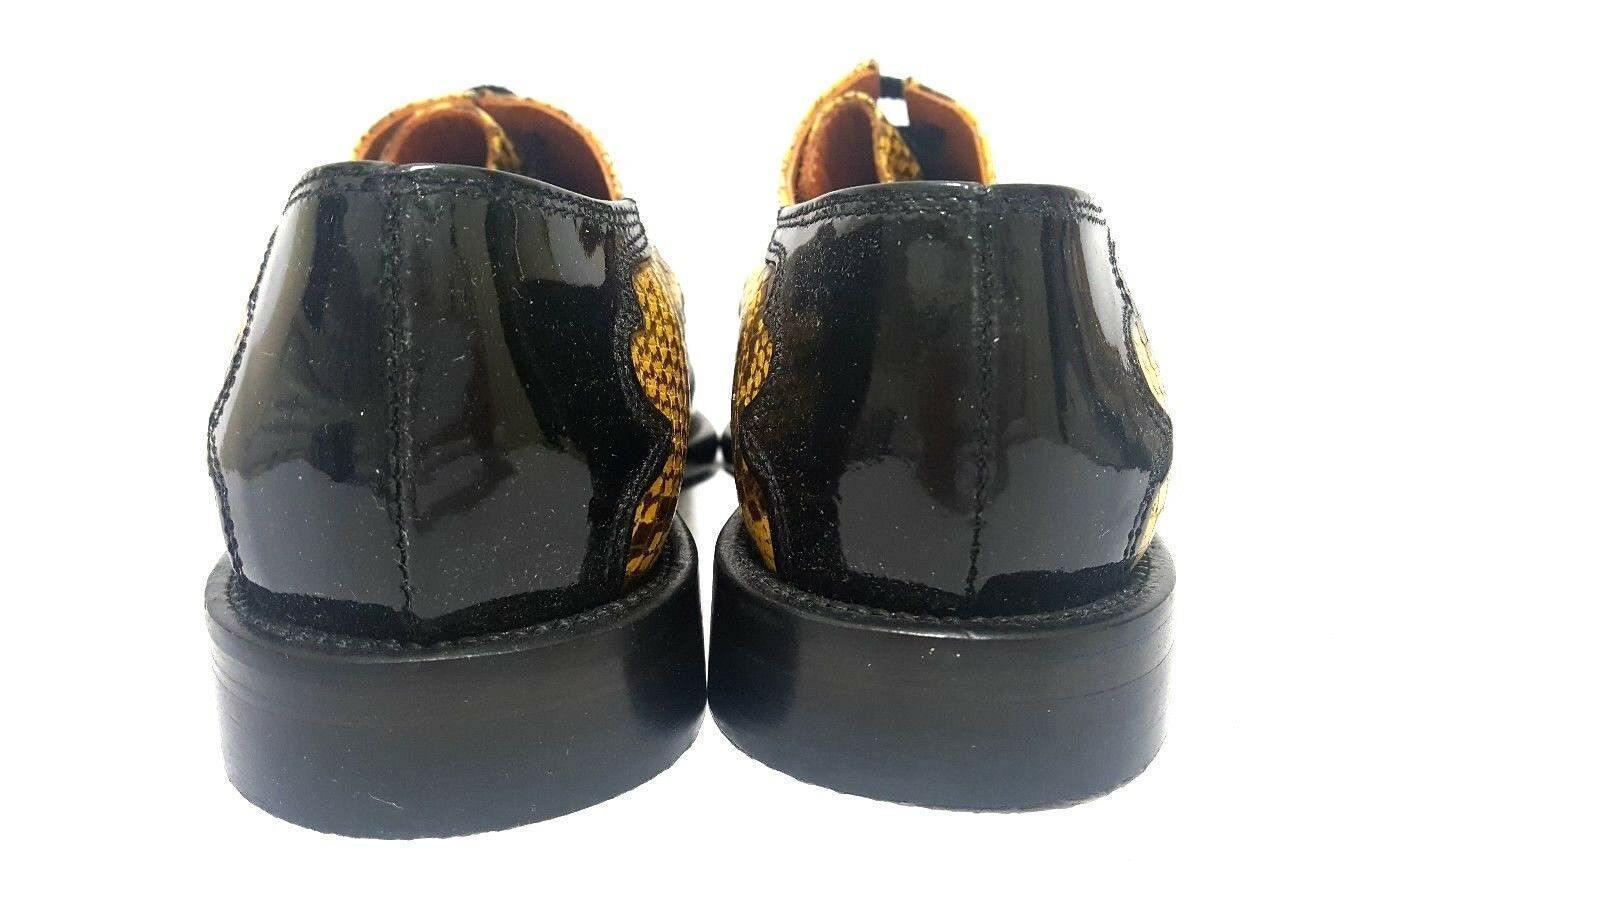 TINO LANZI Womens Leather Black Yellow Oxford Shoes Made in Italy Size 36.5 - SVNYFancy